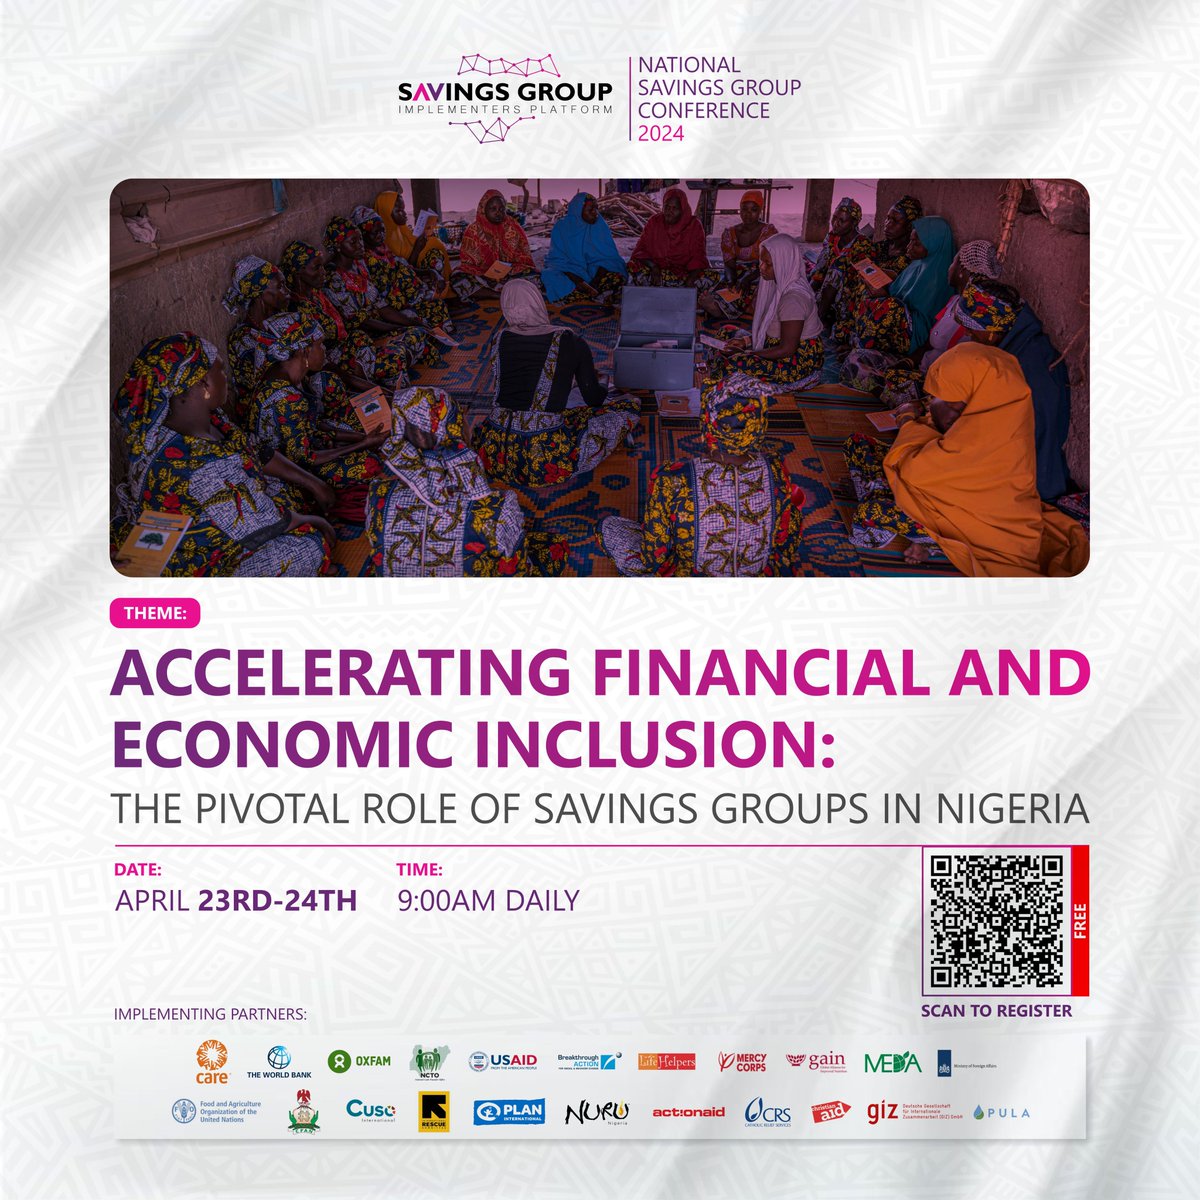 📢 Join us at the National Savings Group Conference (NSGC) organized by @care_ngr in collaboration with SGIP! 🗓️ Date: April 23rd - 24th, 2024 📍 Venue: Hybrid Free Registration! Don't miss out! To participate, click on the link. lnkd.in/dRyS4DC5 #FinancialInclusion